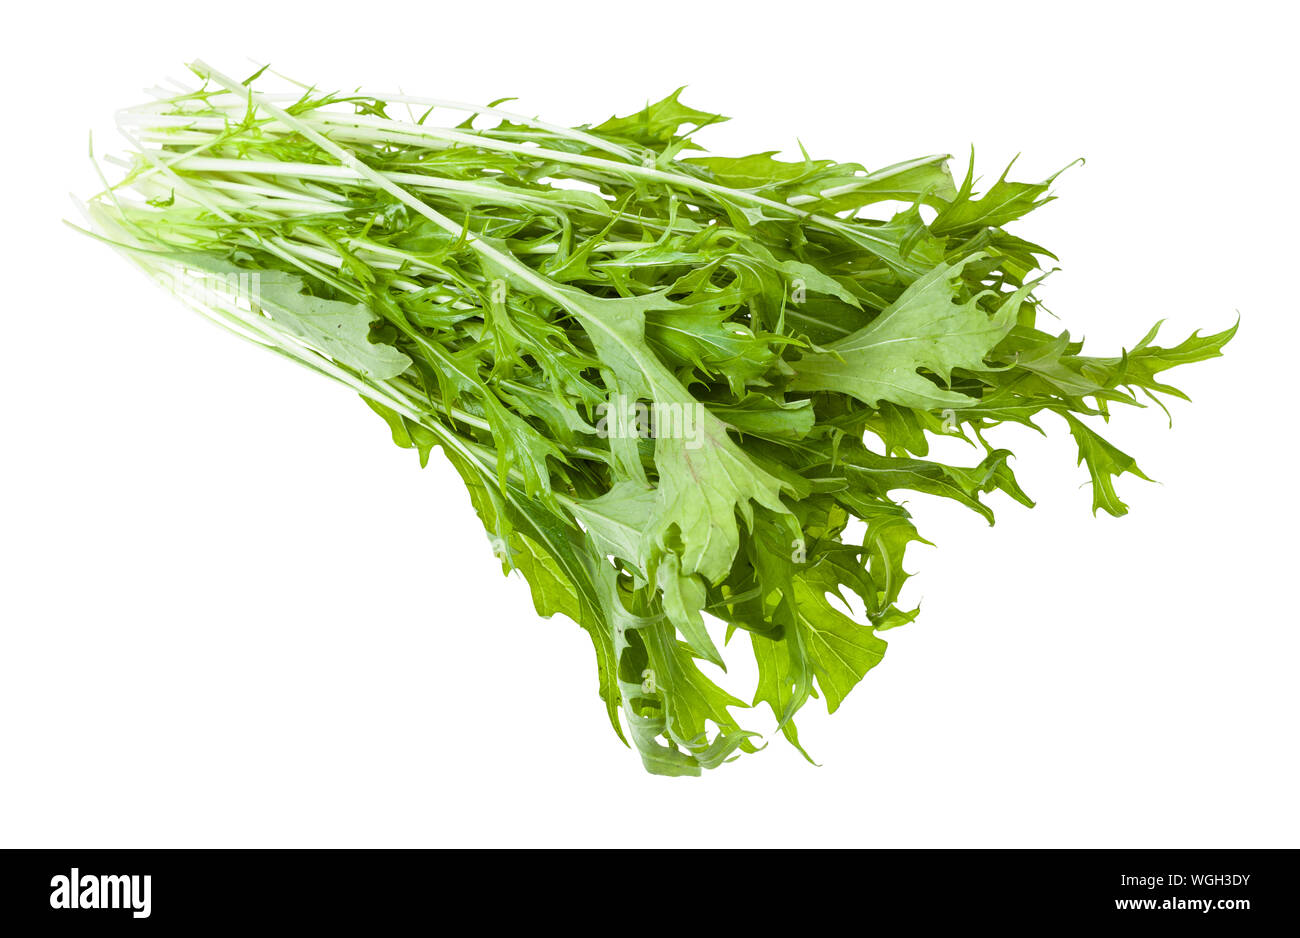 bunch of green mizuna (Japanese mustard greens) plant isolated on white background Stock Photo